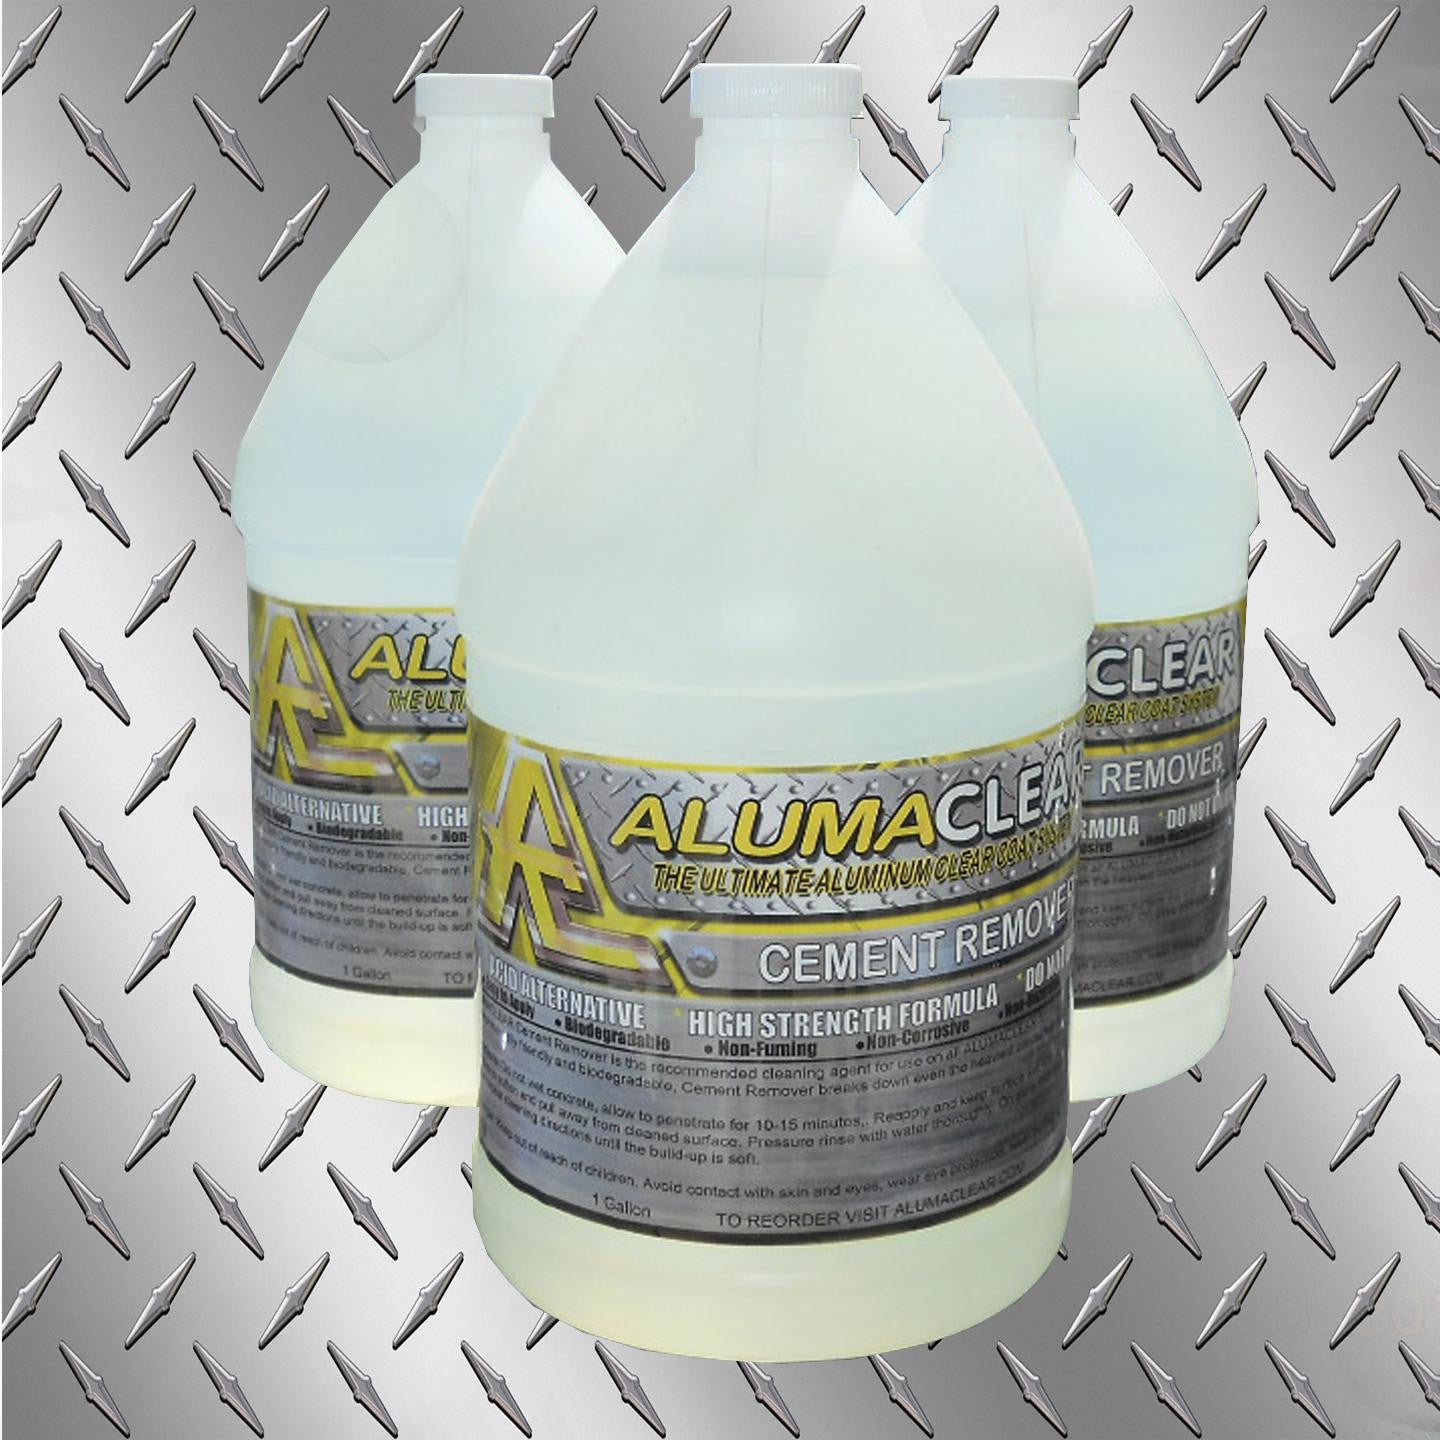 Cement & Lime Remover, 1 gallon, Removes Cement and lime build up from painted and aluminum surfaces